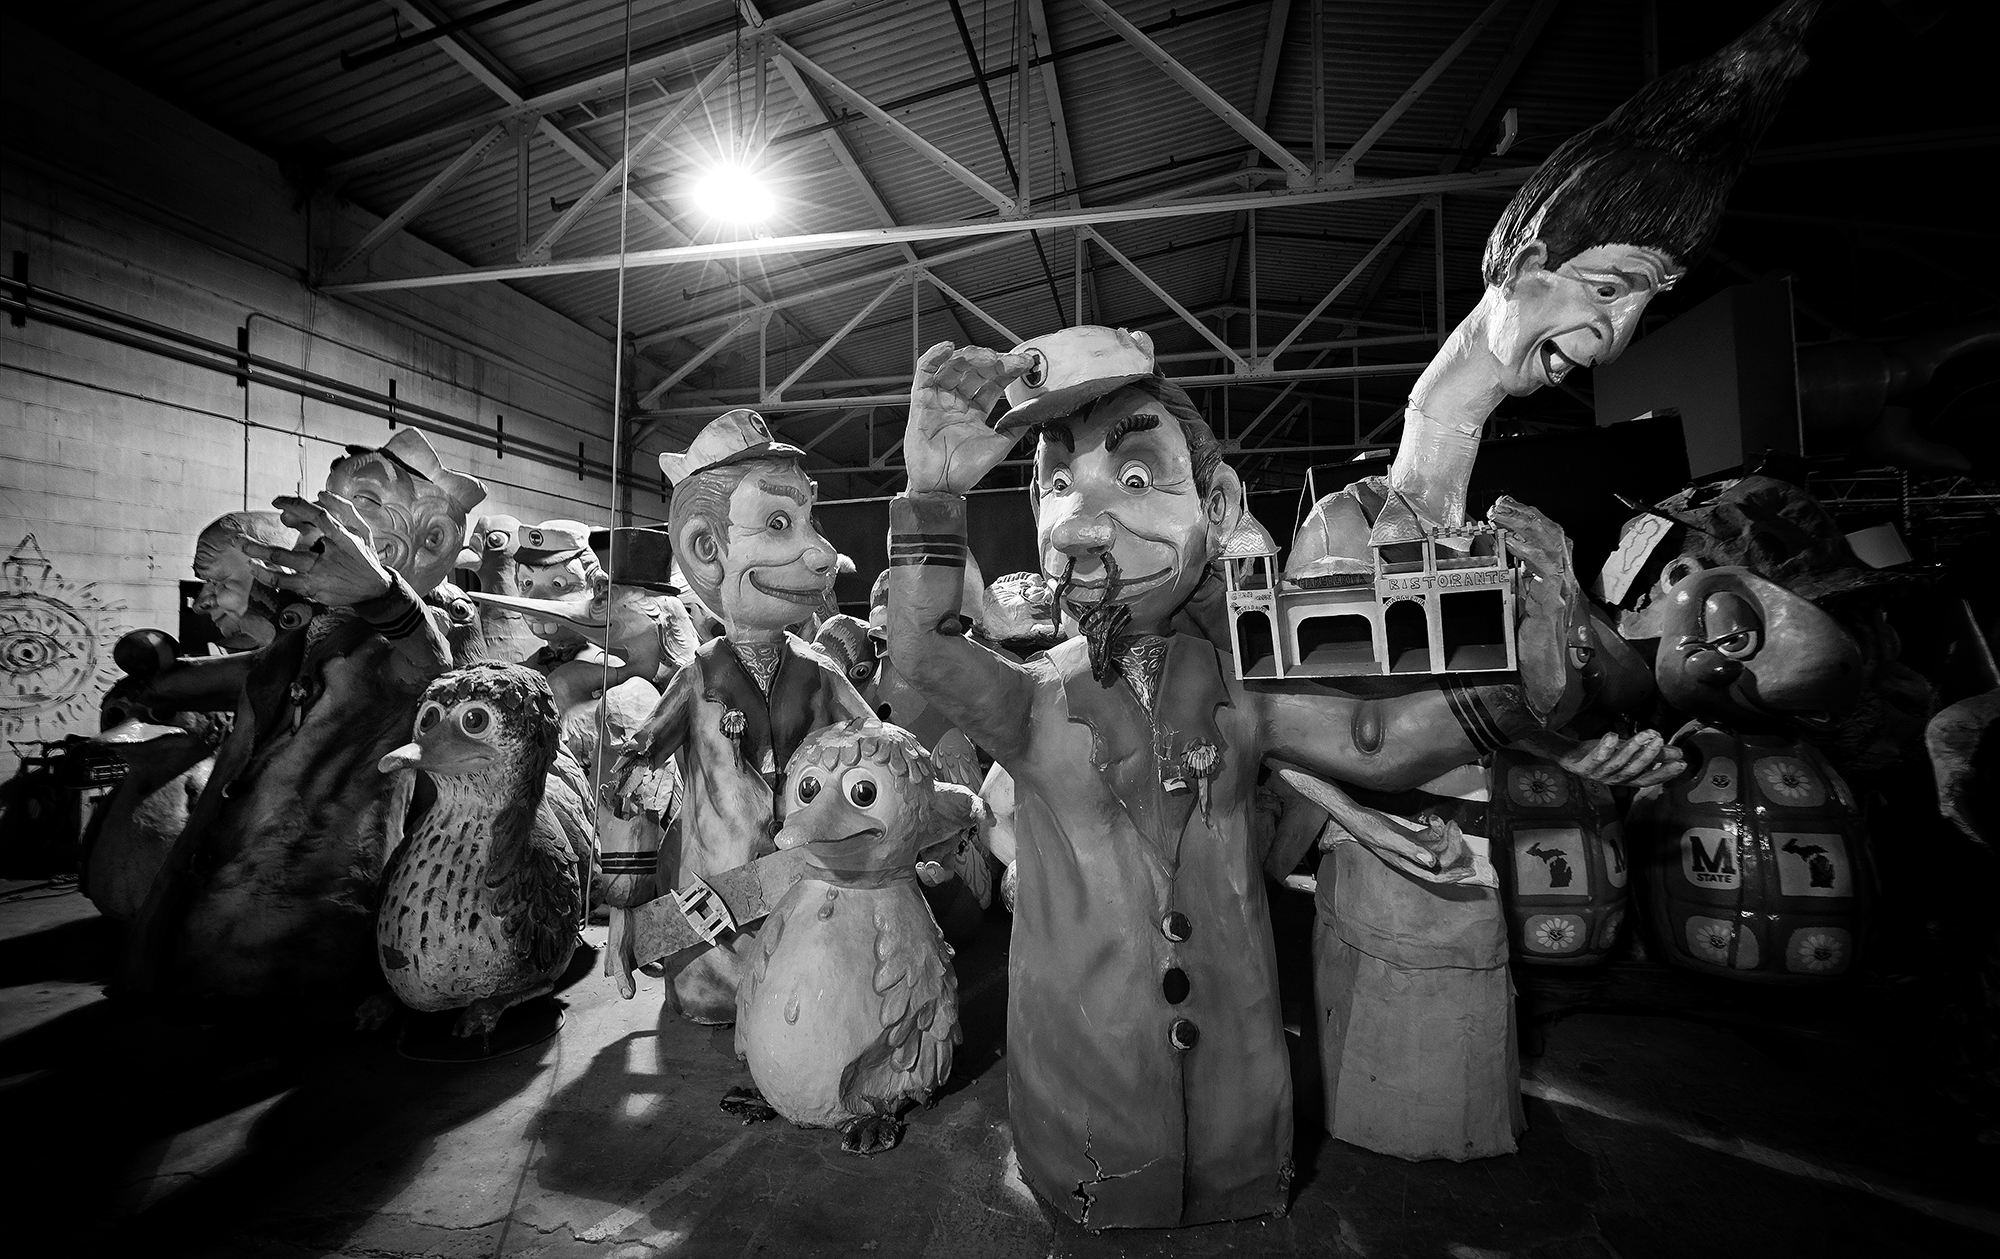 Black and white photo of several cartoonish statues of sailors, animals, and other people.